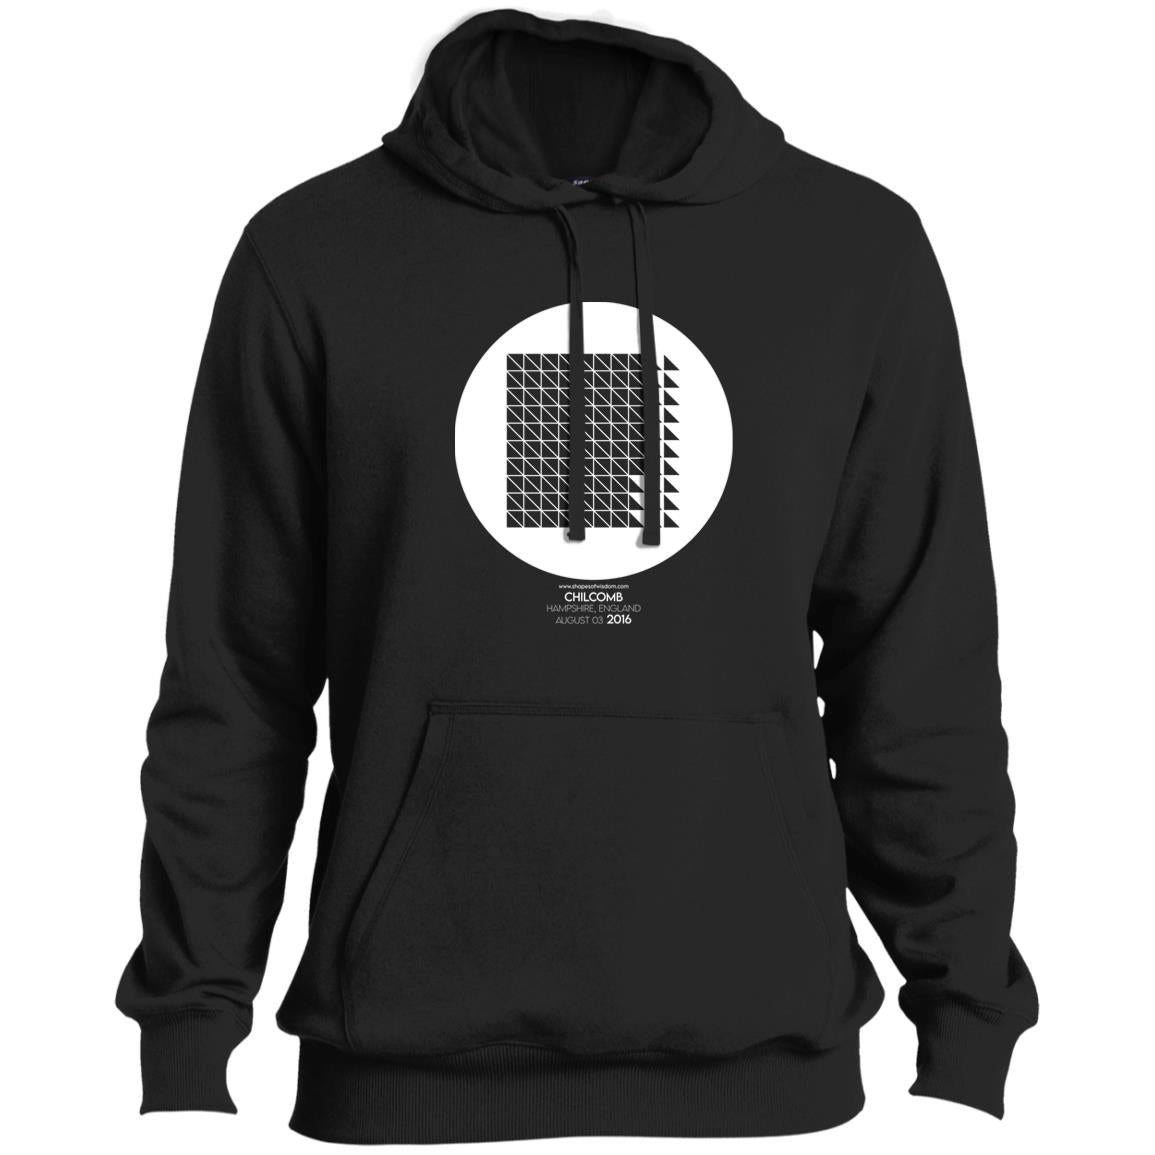 Crop Circle Pullover Hoodie - Chilcomb